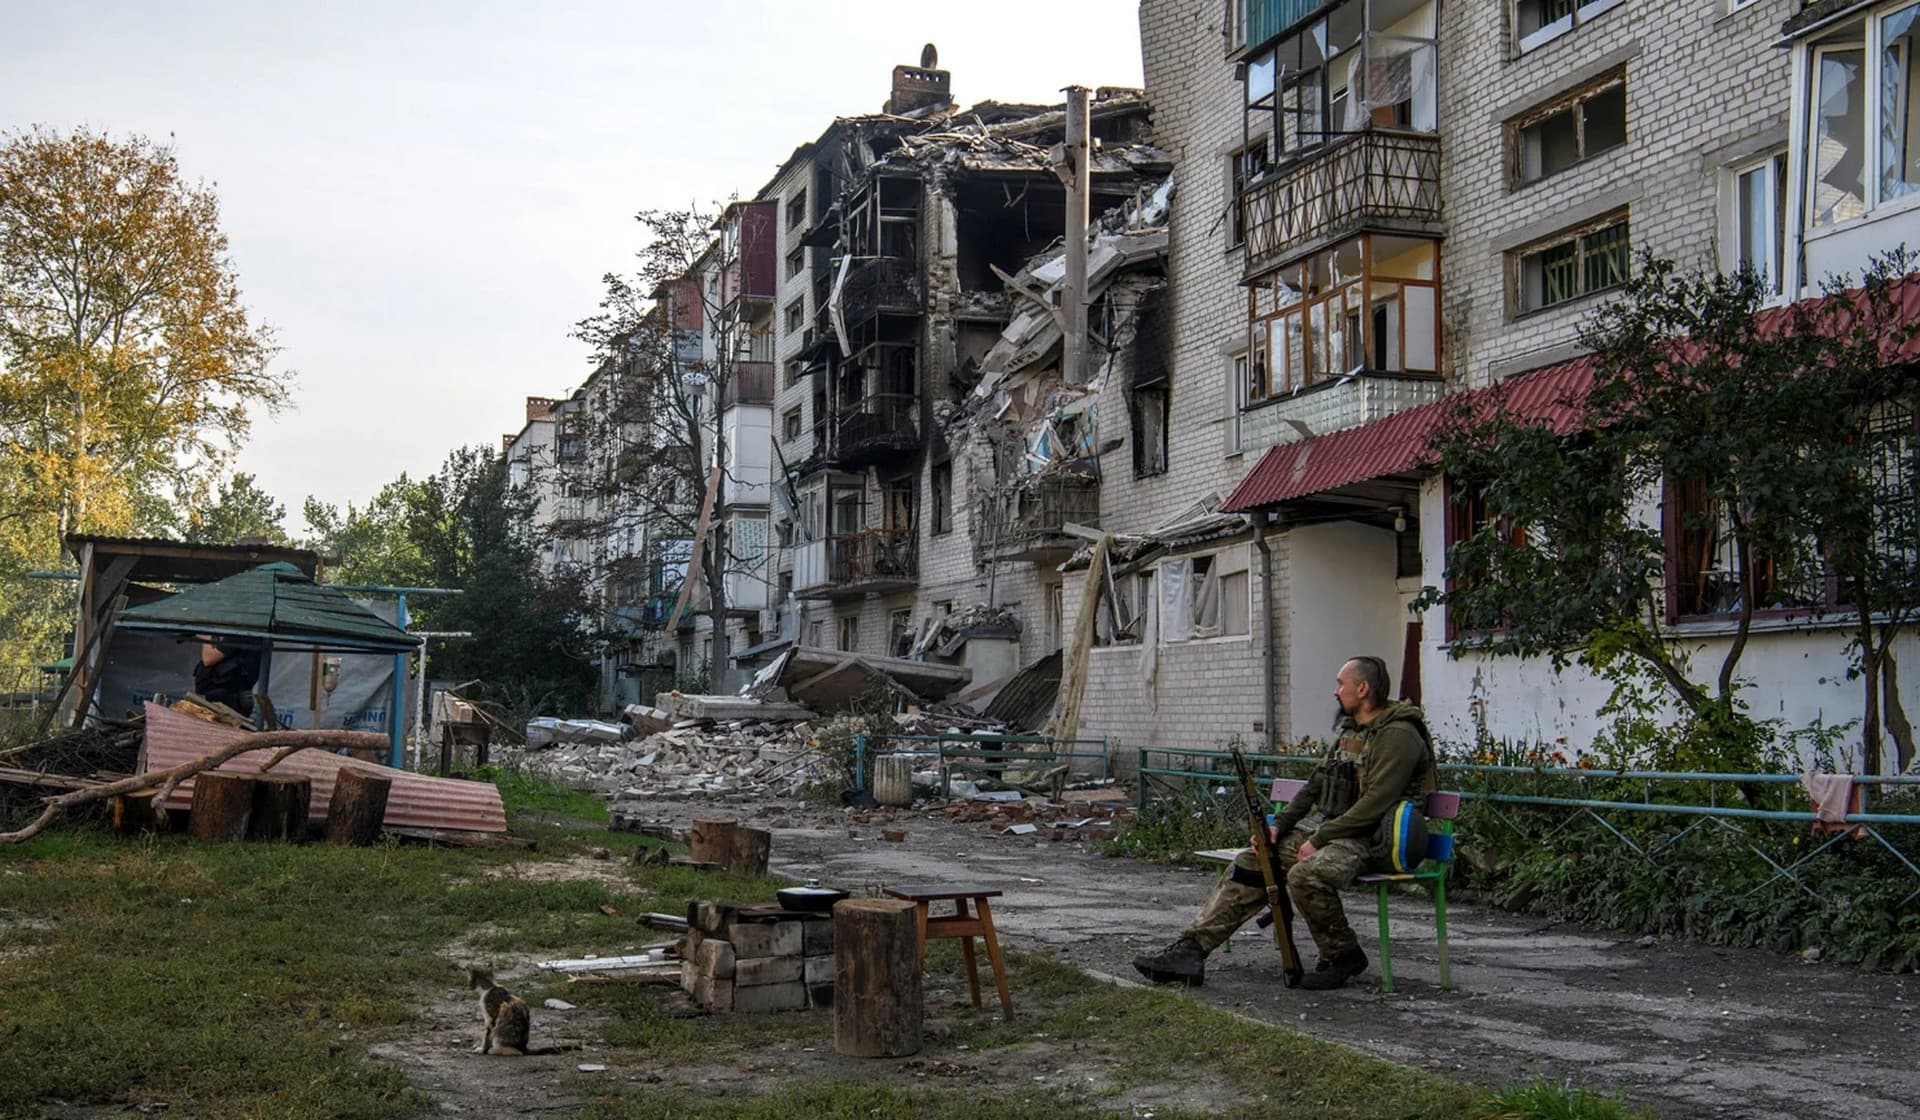 A Ukrainian service member sits on a bench near a destroyed residential building in the town of Sviatohirsk